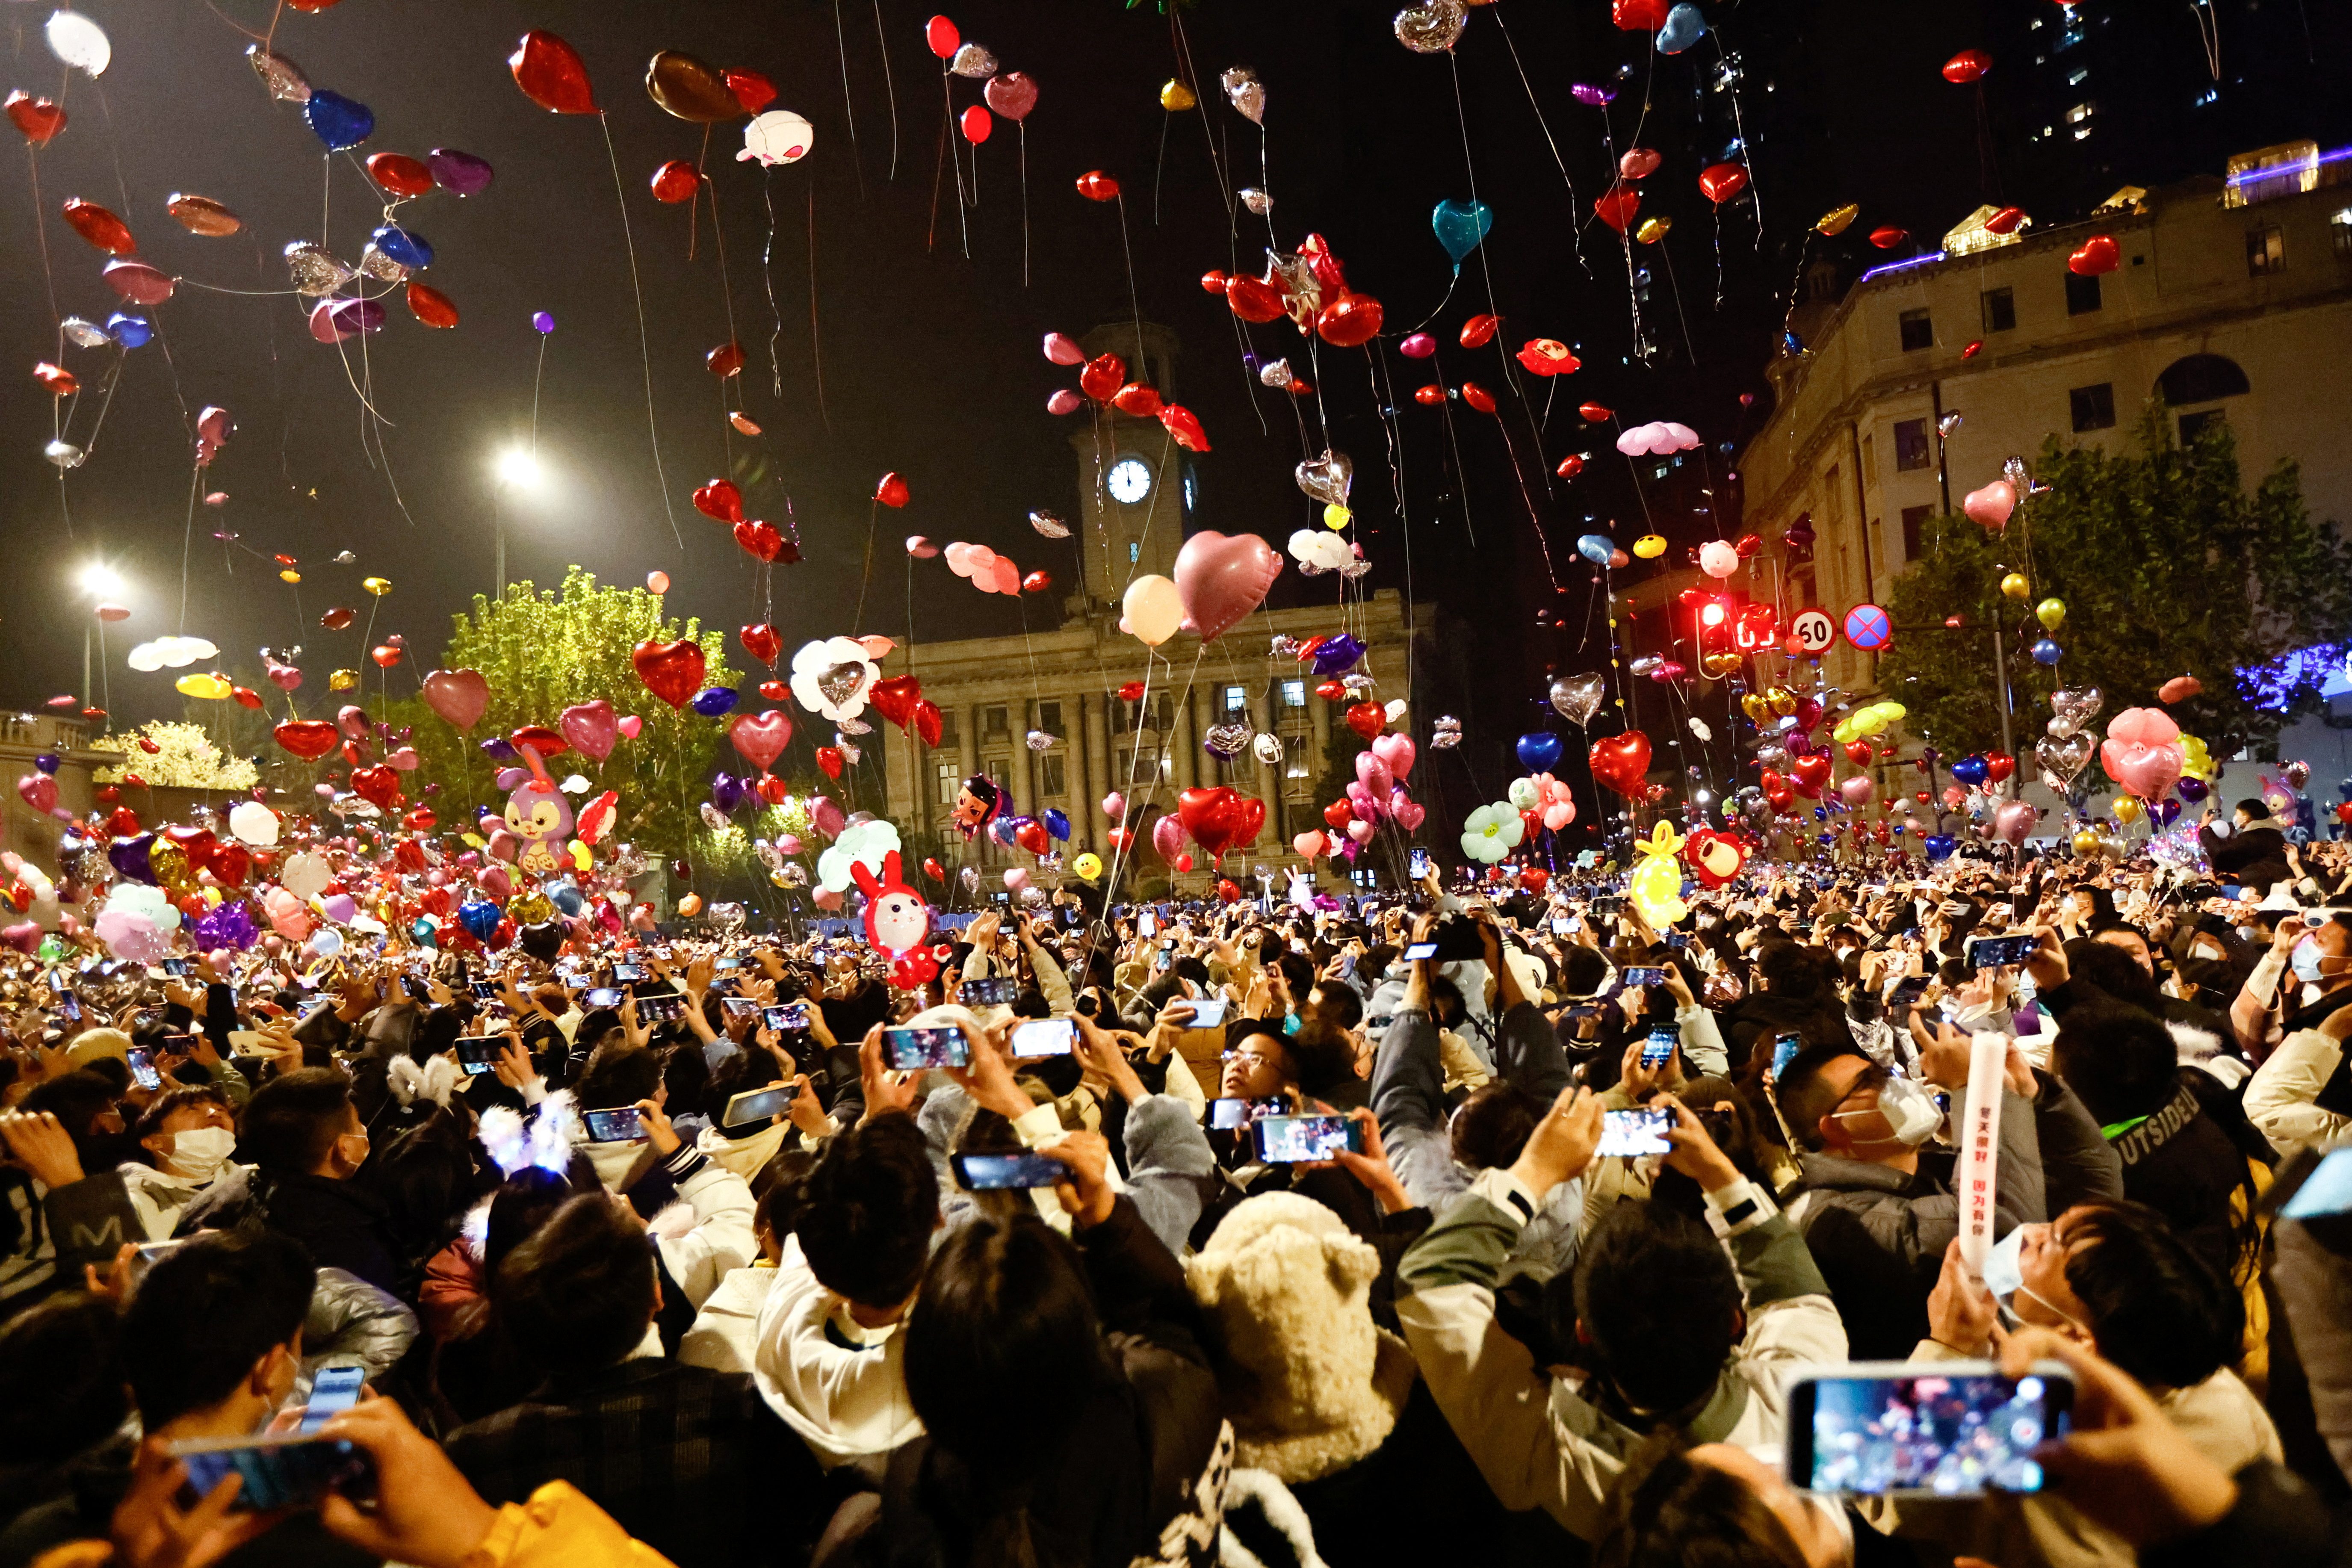 New Year's Eve celebration amid COVID-19 outbreak in Wuhan